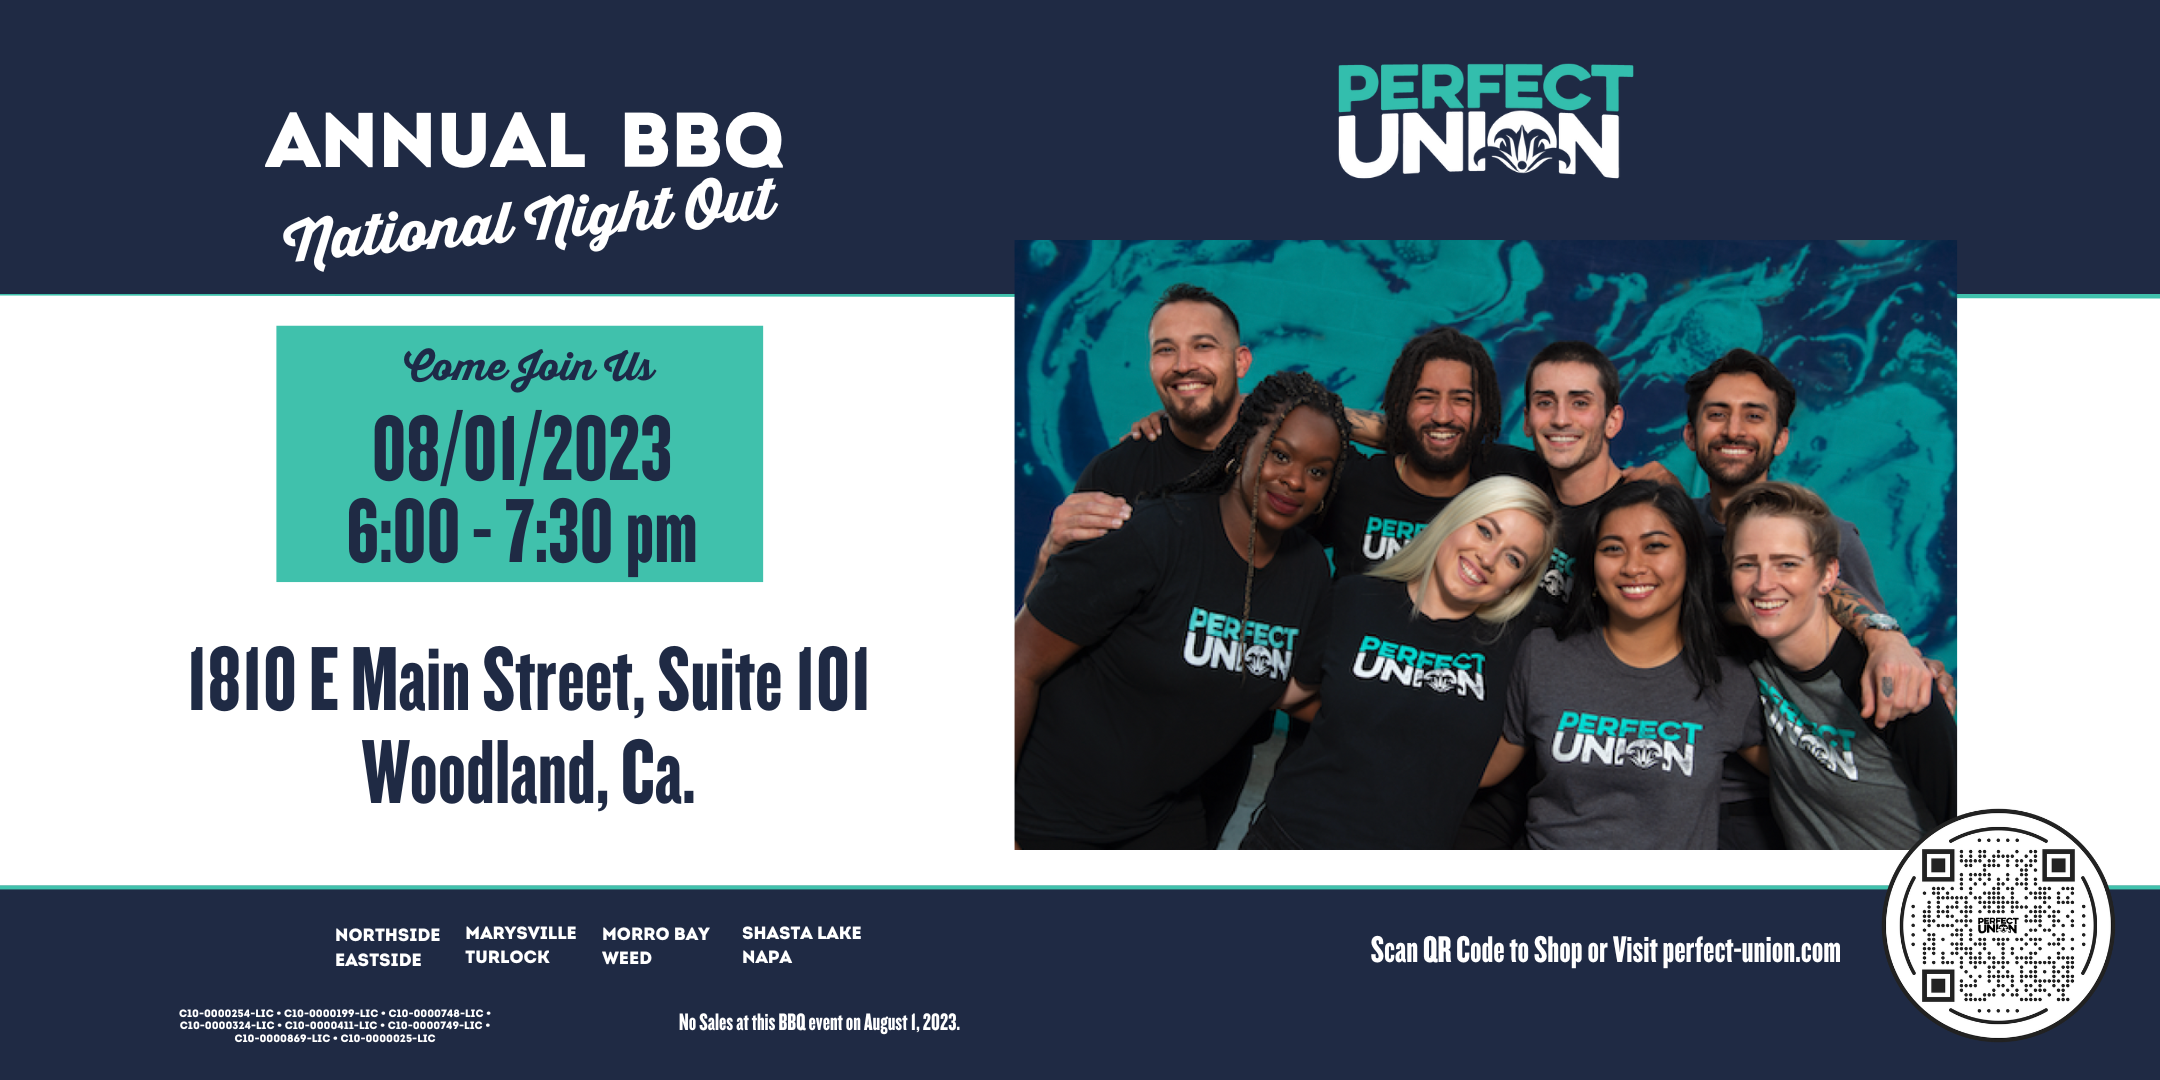 Perfect Union Hosts Free BBQ at Woodlands National Night Out